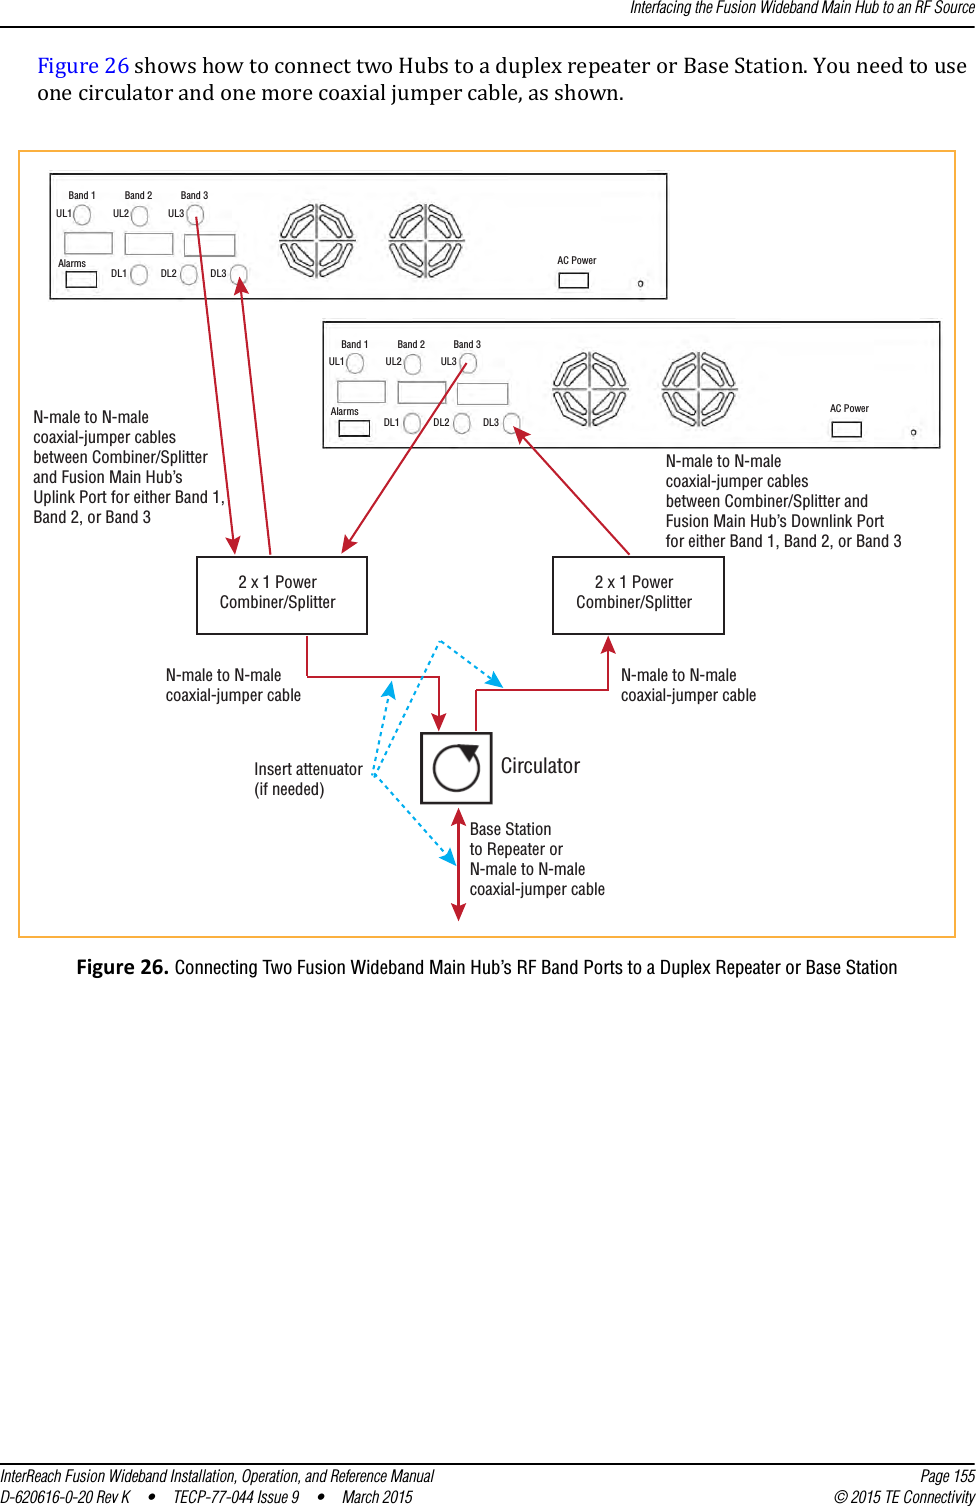 Interfacing the Fusion Wideband Main Hub to an RF SourceInterReach Fusion Wideband Installation, Operation, and Reference Manual Page 155D-620616-0-20 Rev K  •  TECP-77-044 Issue 9  •  March 2015 © 2015 TE ConnectivityFigure 26 shows how to connect two Hubs to a duplex repeater or Base Station. You need to use one circulator and one more coaxial jumper cable, as shown.Figure 26. Connecting Two Fusion Wideband Main Hub’s RF Band Ports to a Duplex Repeater or Base Station Band 1 Band 2 Band 3UL1 UL2 UL3AlarmsDL1 DL2 DL3AC PowerN-male to N-malecoaxial-jumper cablesbetween Combiner/Splitterand Fusion Main Hub’s Uplink Port for either Band 1,Band 2, or Band 32 x 1 PowerCombiner/Splitter2 x 1 PowerCombiner/SplitterN-male to N-malecoaxial-jumper cablesbetween Combiner/Splitter andFusion Main Hub’s Downlink Portfor either Band 1, Band 2, or Band 3Band 1 Band 2 Band 3UL1 UL2 UL3AlarmsDL1 DL2 DL3AC PowerCirculatorBase Stationto Repeater orN-male to N-malecoaxial-jumper cableN-male to N-malecoaxial-jumper cableN-male to N-malecoaxial-jumper cableInsert attenuator(if needed)